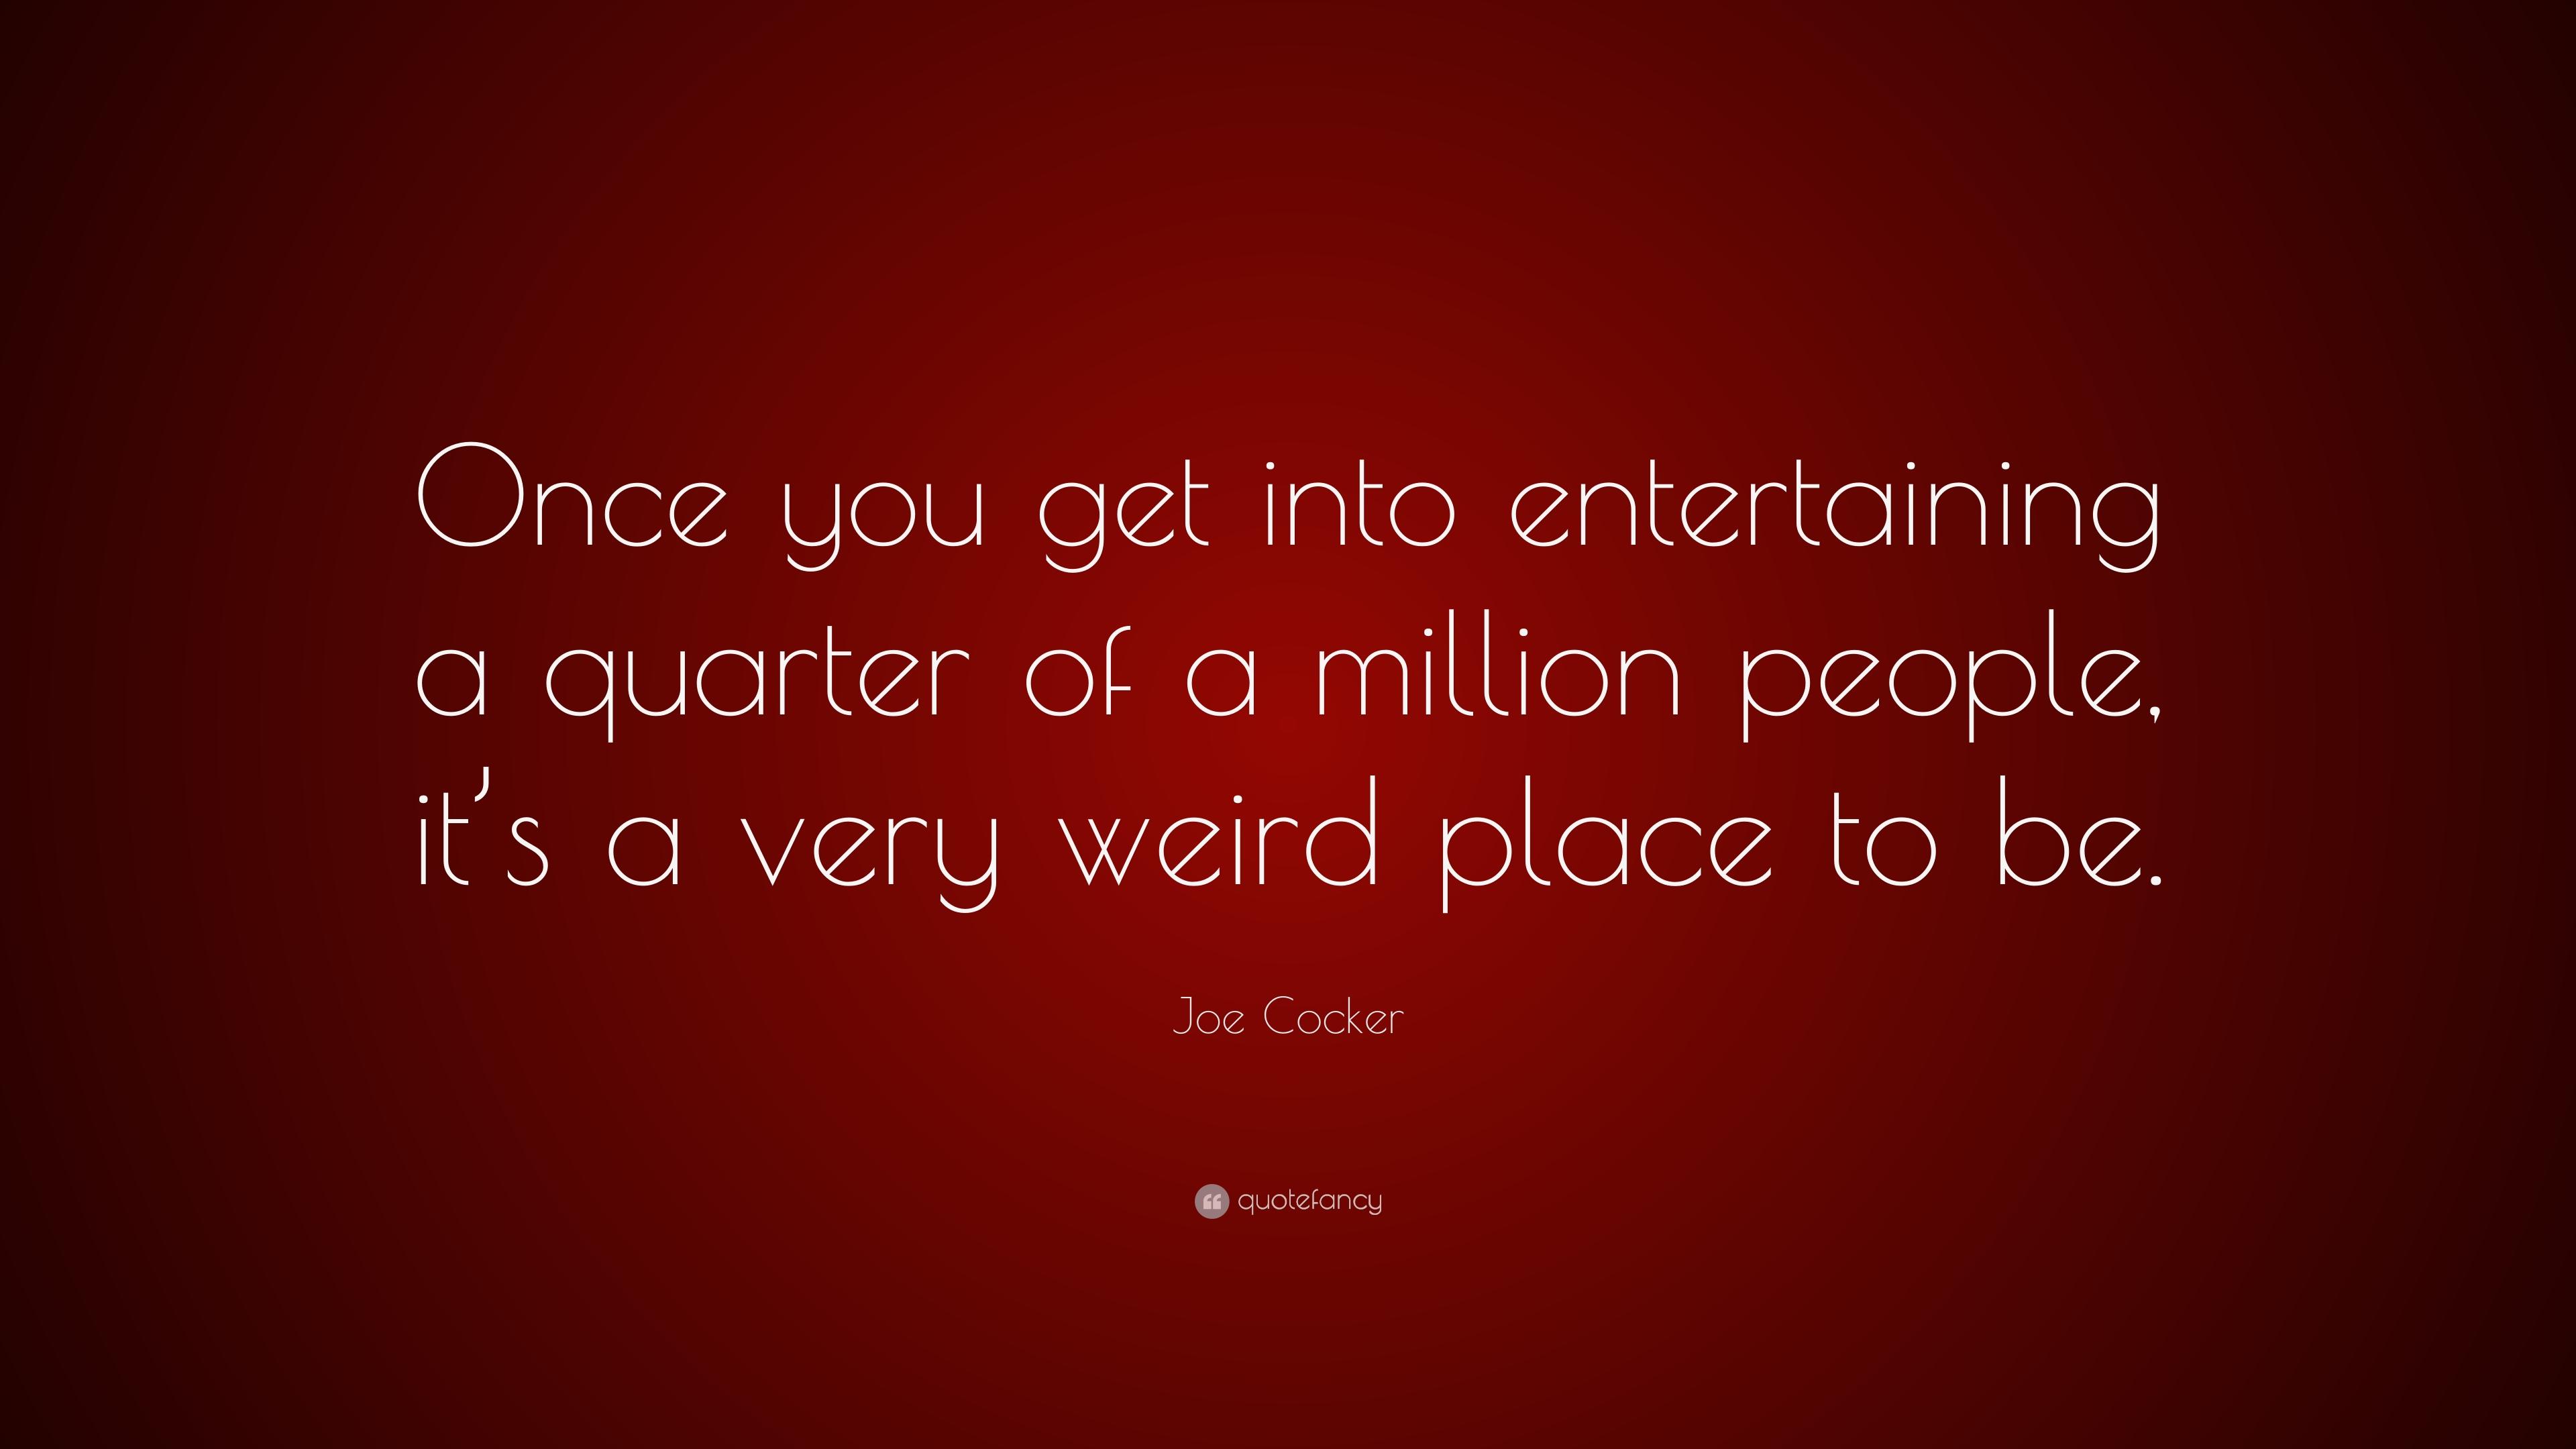 Joe Cocker Quote: “Once you get into entertaining a quarter of a